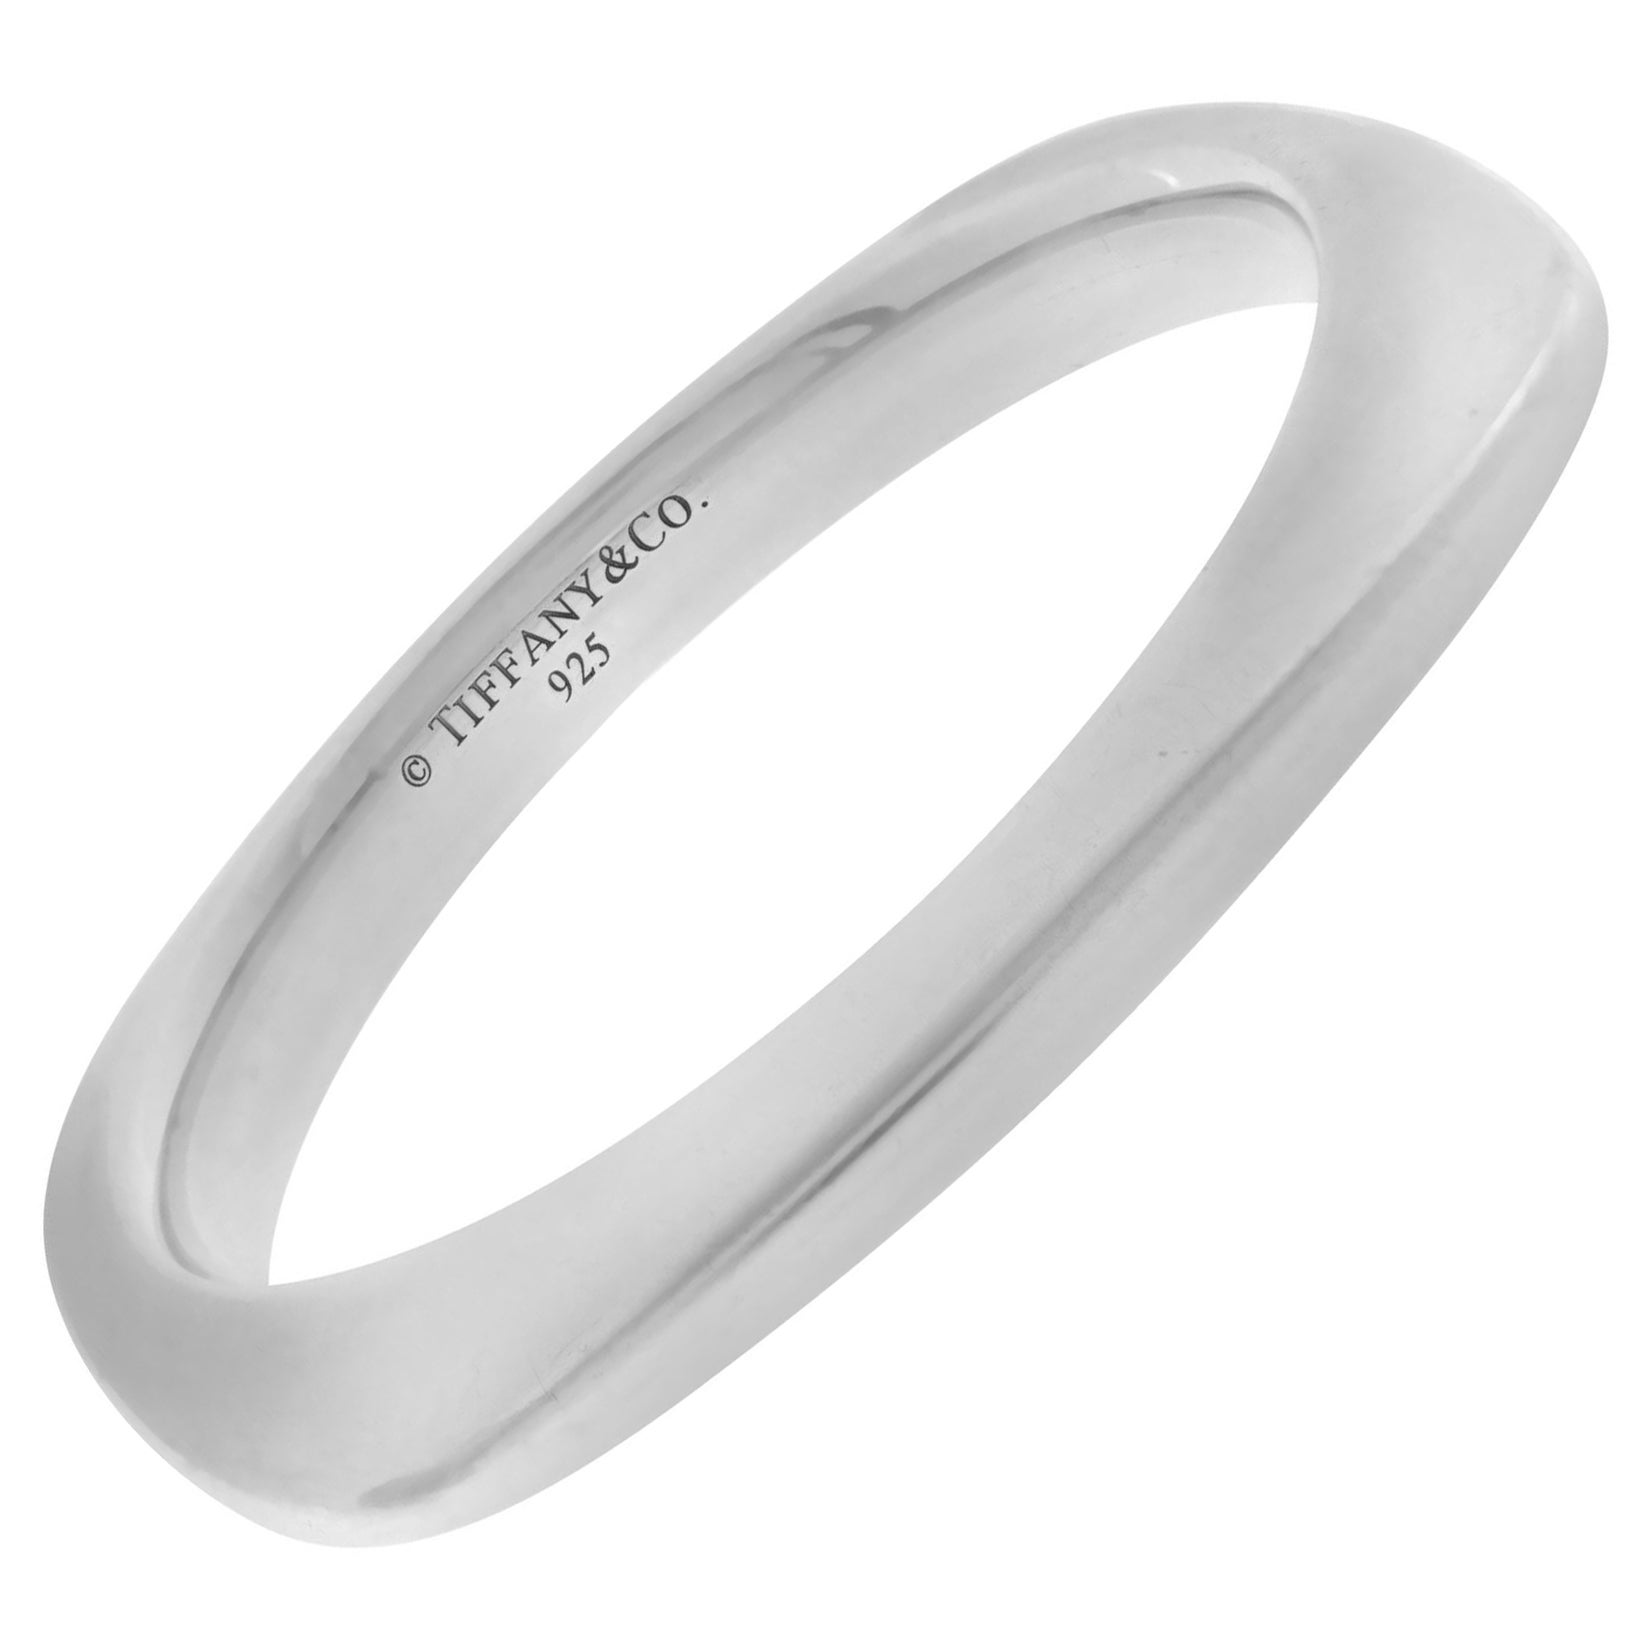 Tiffany & Co. cushion square sterling silver bangle bracelet For Sale